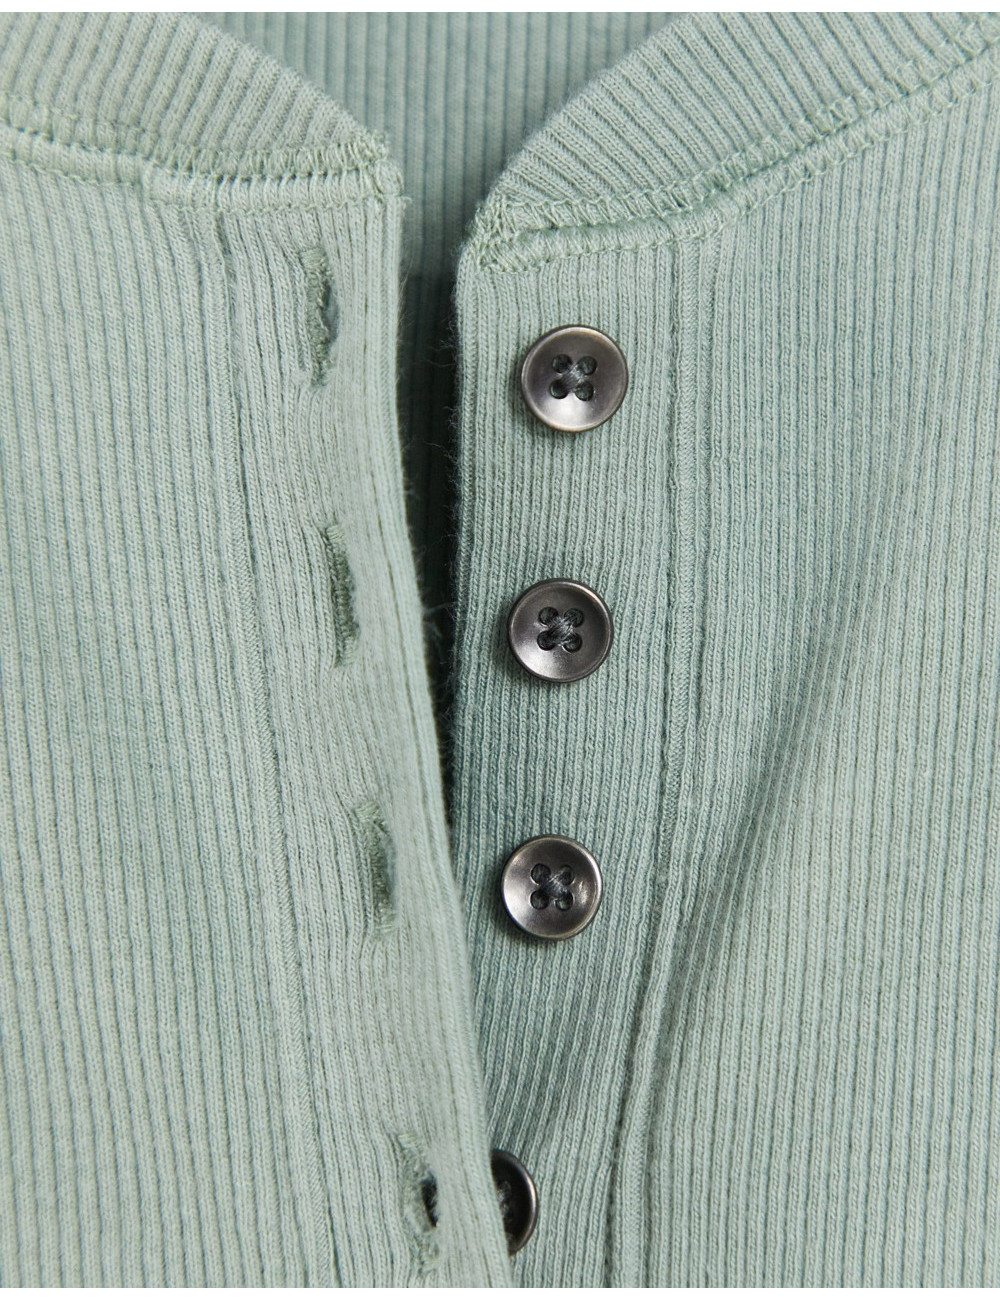 Abercrombie & Fitch button...